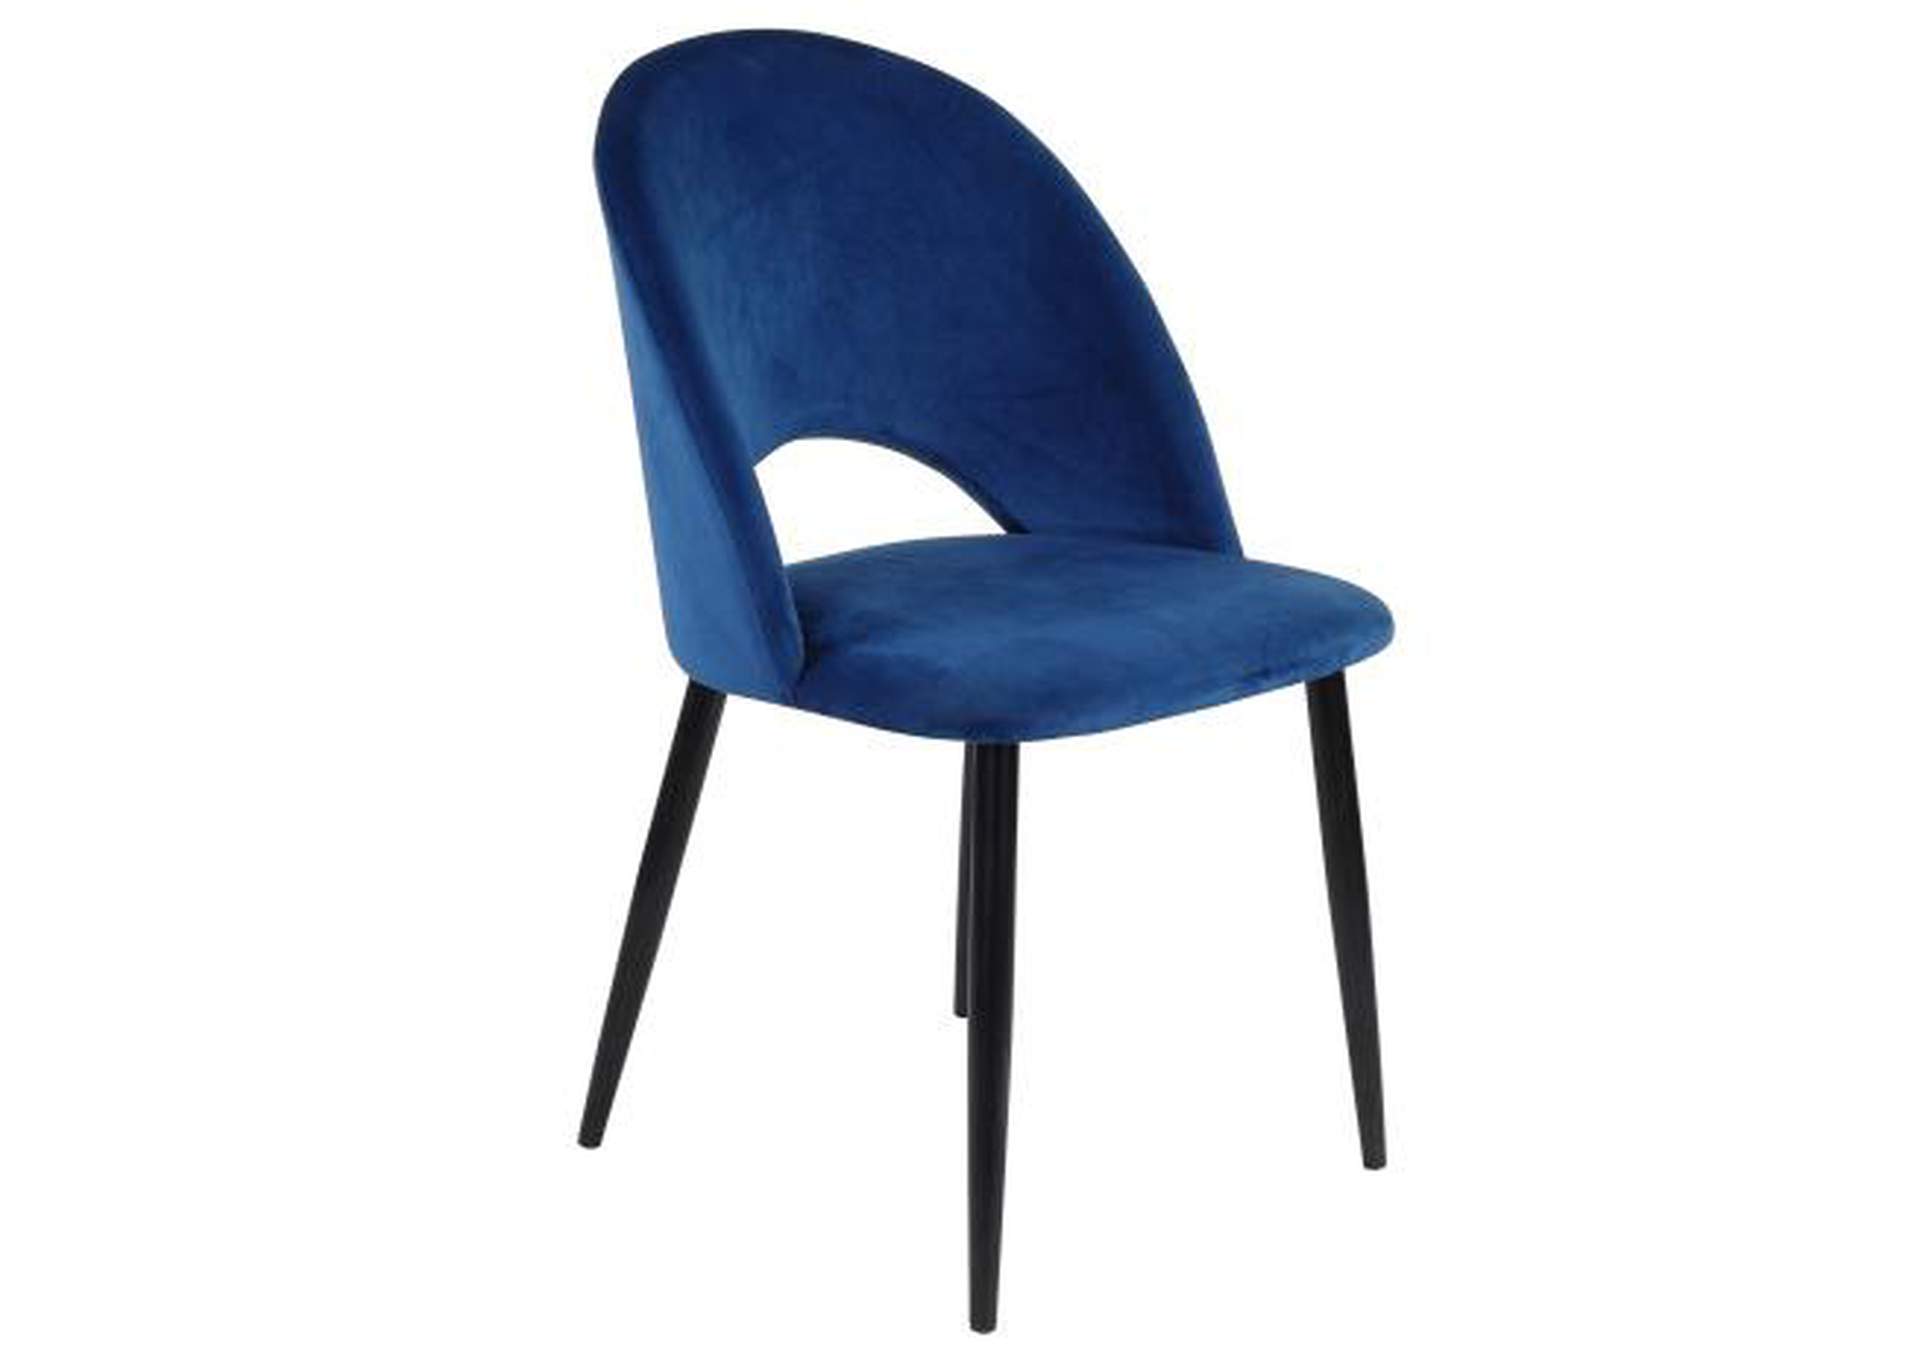 C005U Blue Dining Chair 2-In-1Box,Global Trading